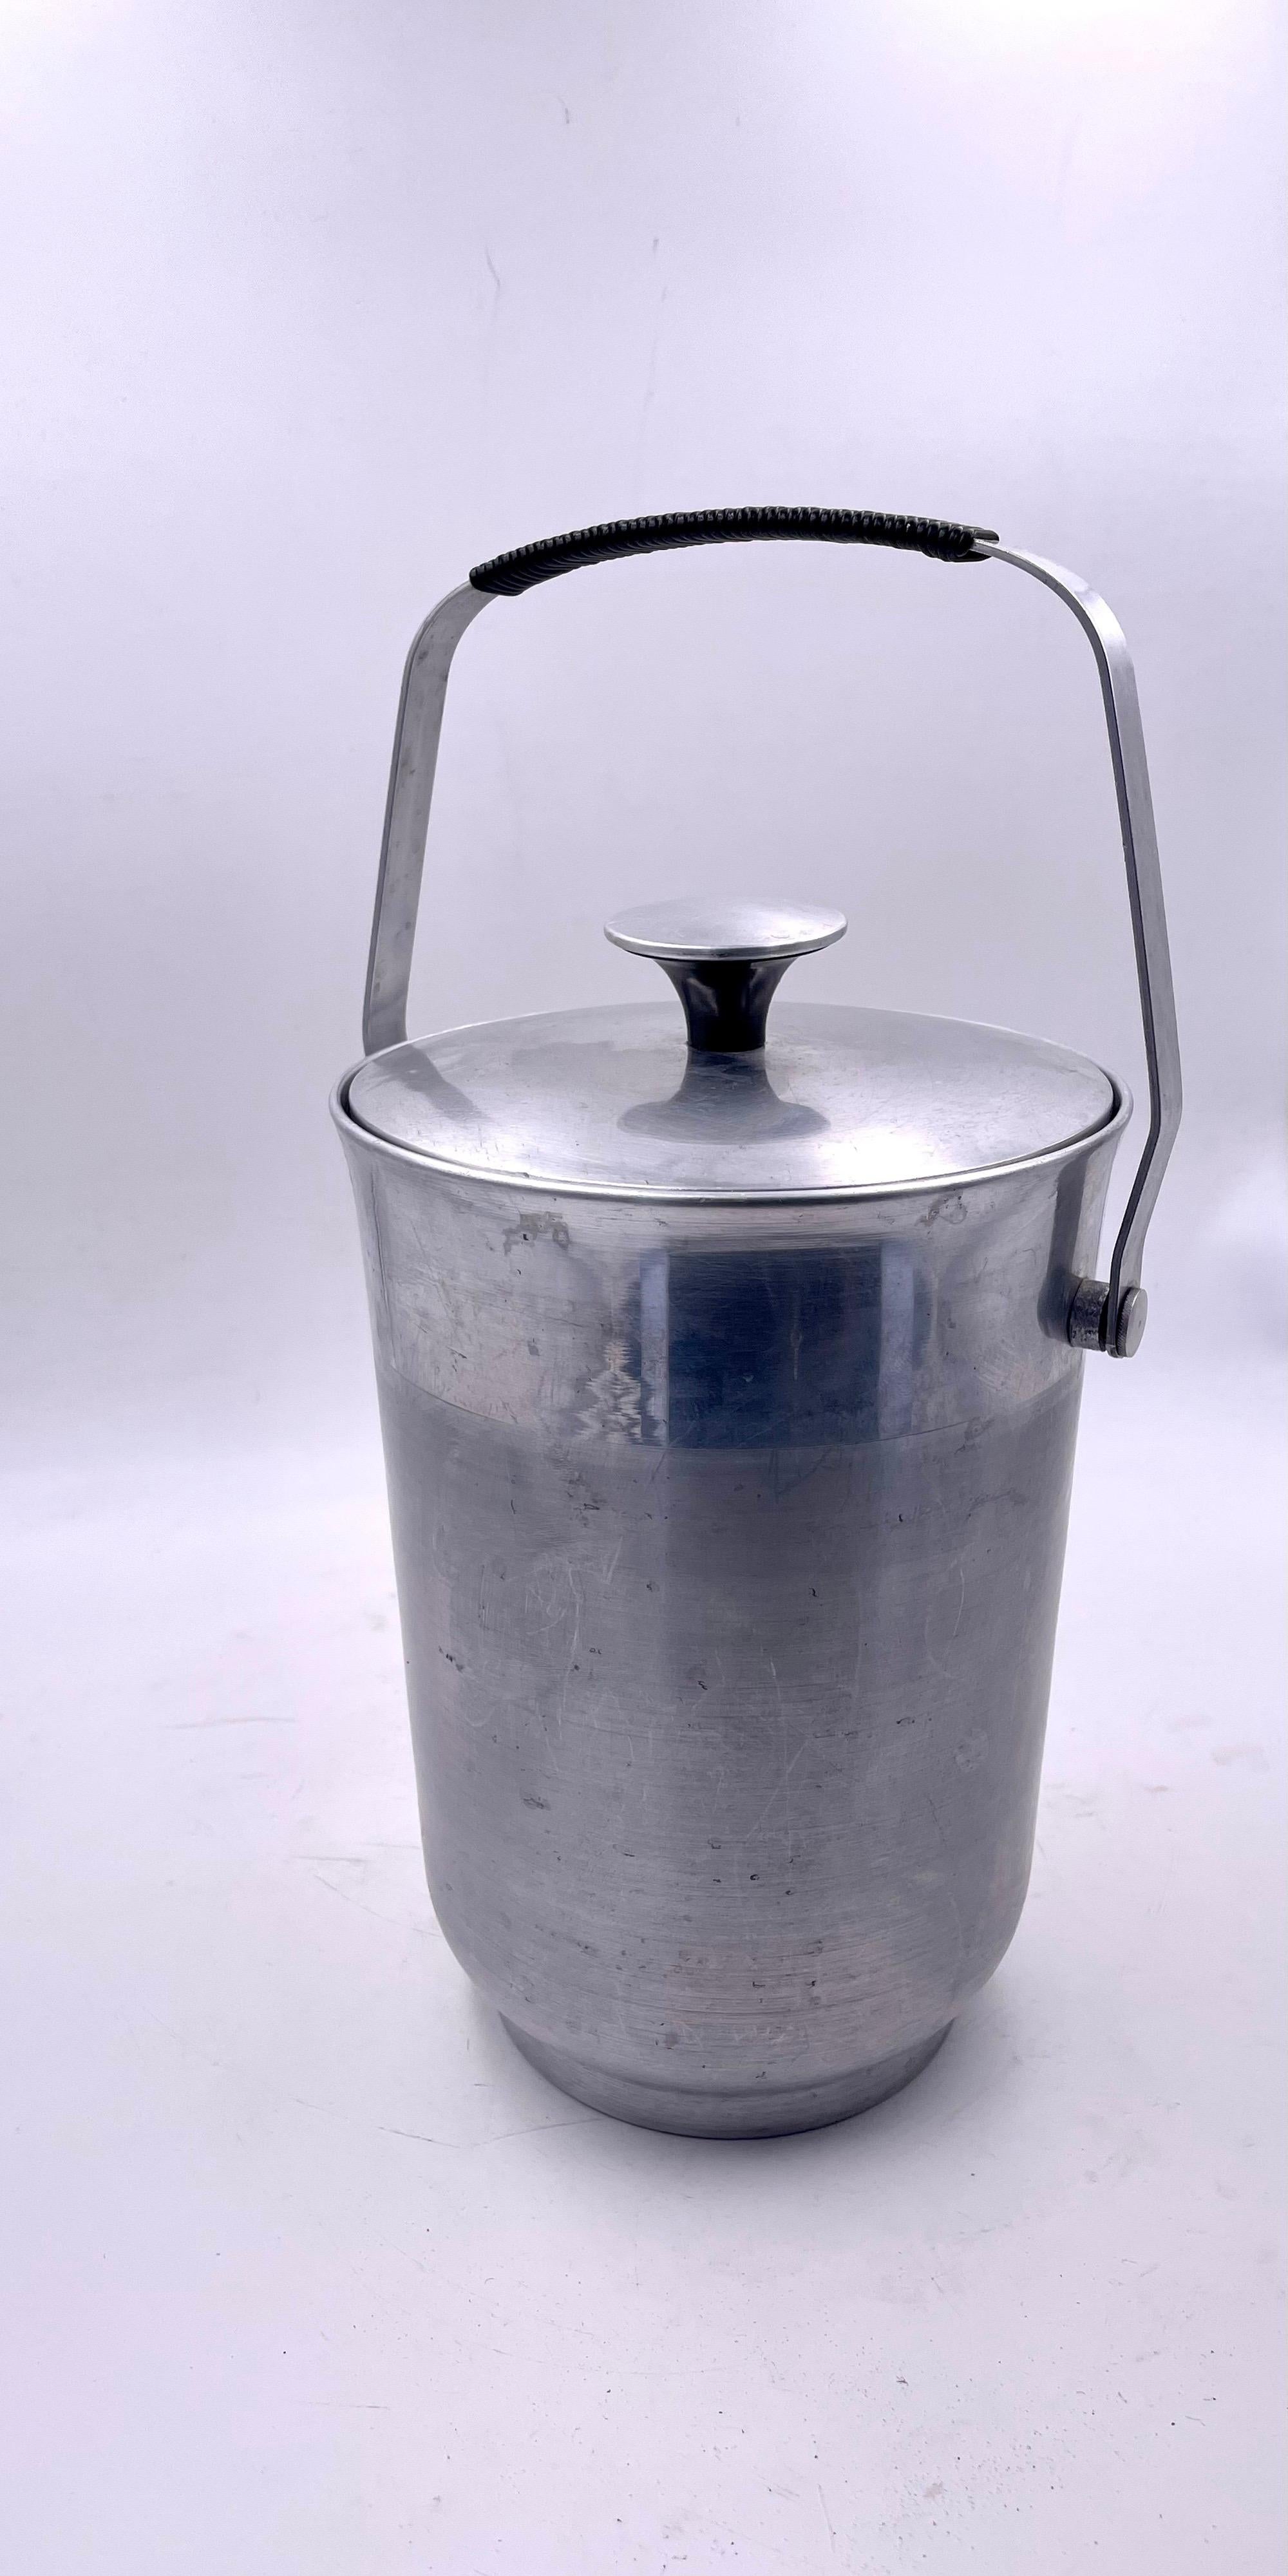 Beautiful rare Art Deco spun aluminum ice bucket, made in Italy circa 1940's with wrapped handle and bakelite top, some wear due to age overall looks ok.